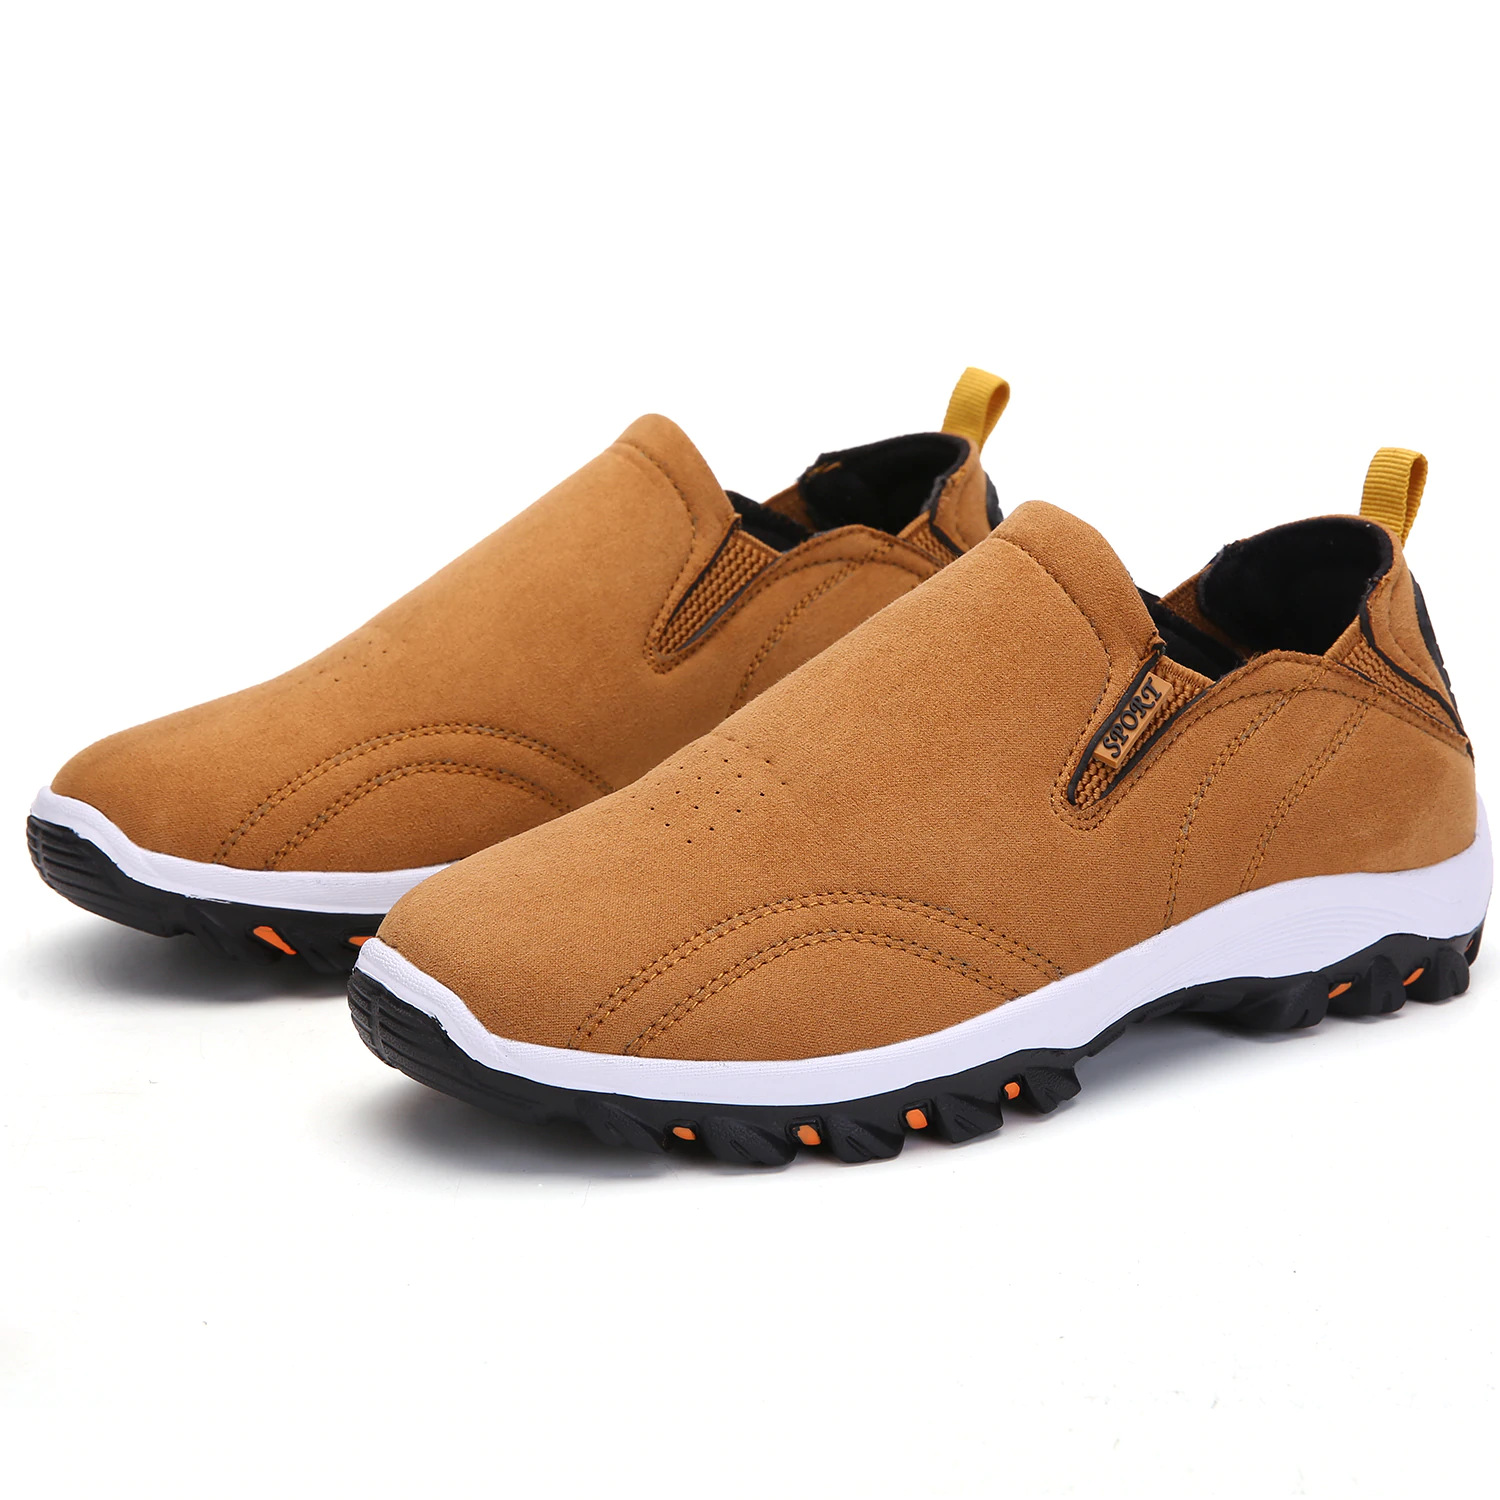 Men Shoes Spring Casual Shoes Comfortable Fashion Light Outdoor Running Climbing Shoes Hiking Sneakers Non-Slip Loafers